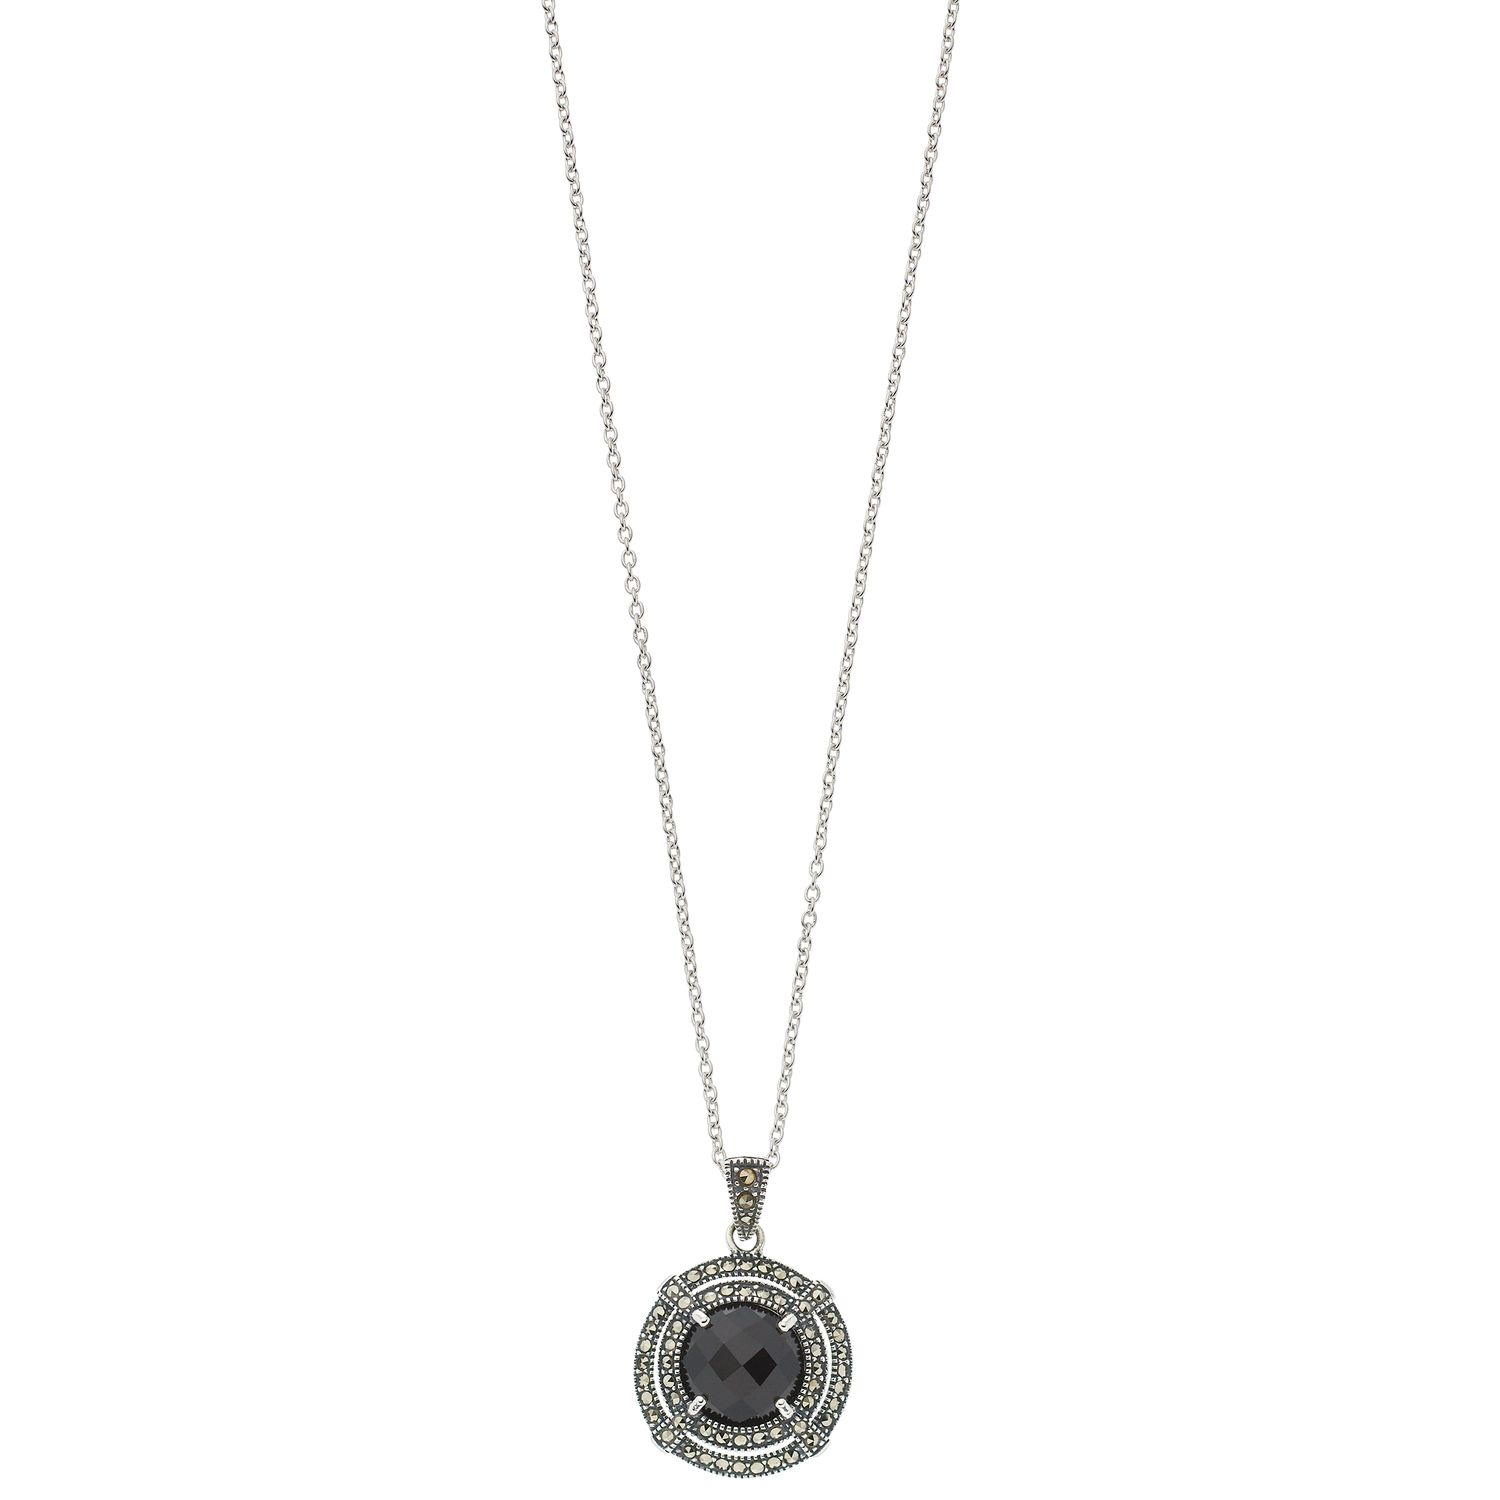 Image for Lavish by TJM Sterling Silver Black Onyx & Marcasite Circle Pendant Necklace at Kohl's.